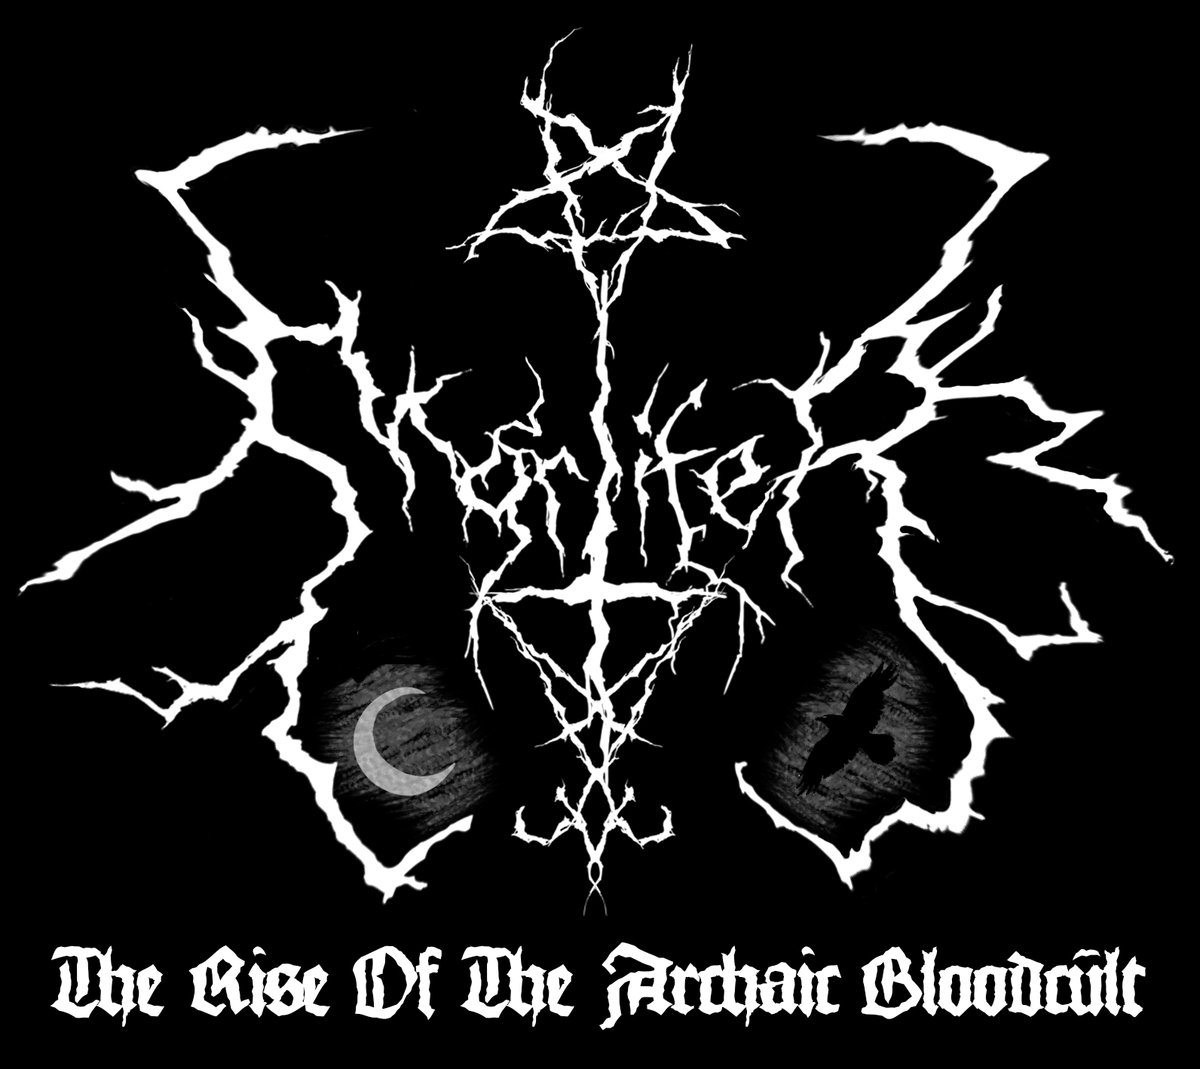 Mortifer - The Rise Of The Archaic Bloodcult (2015) Album Info